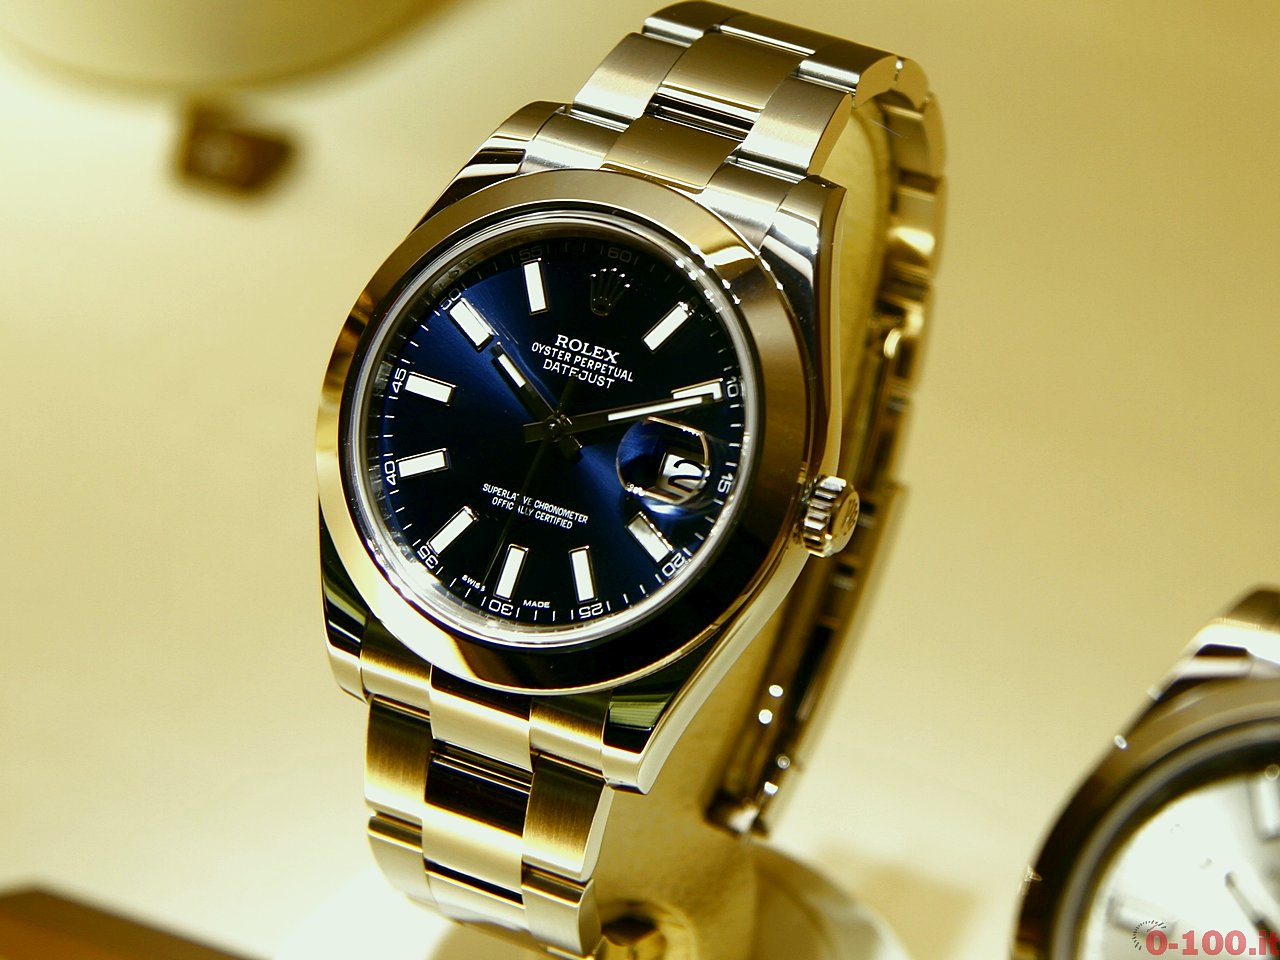 baselworld-2015_rolex-oyster-perpetual-39-0-100_9